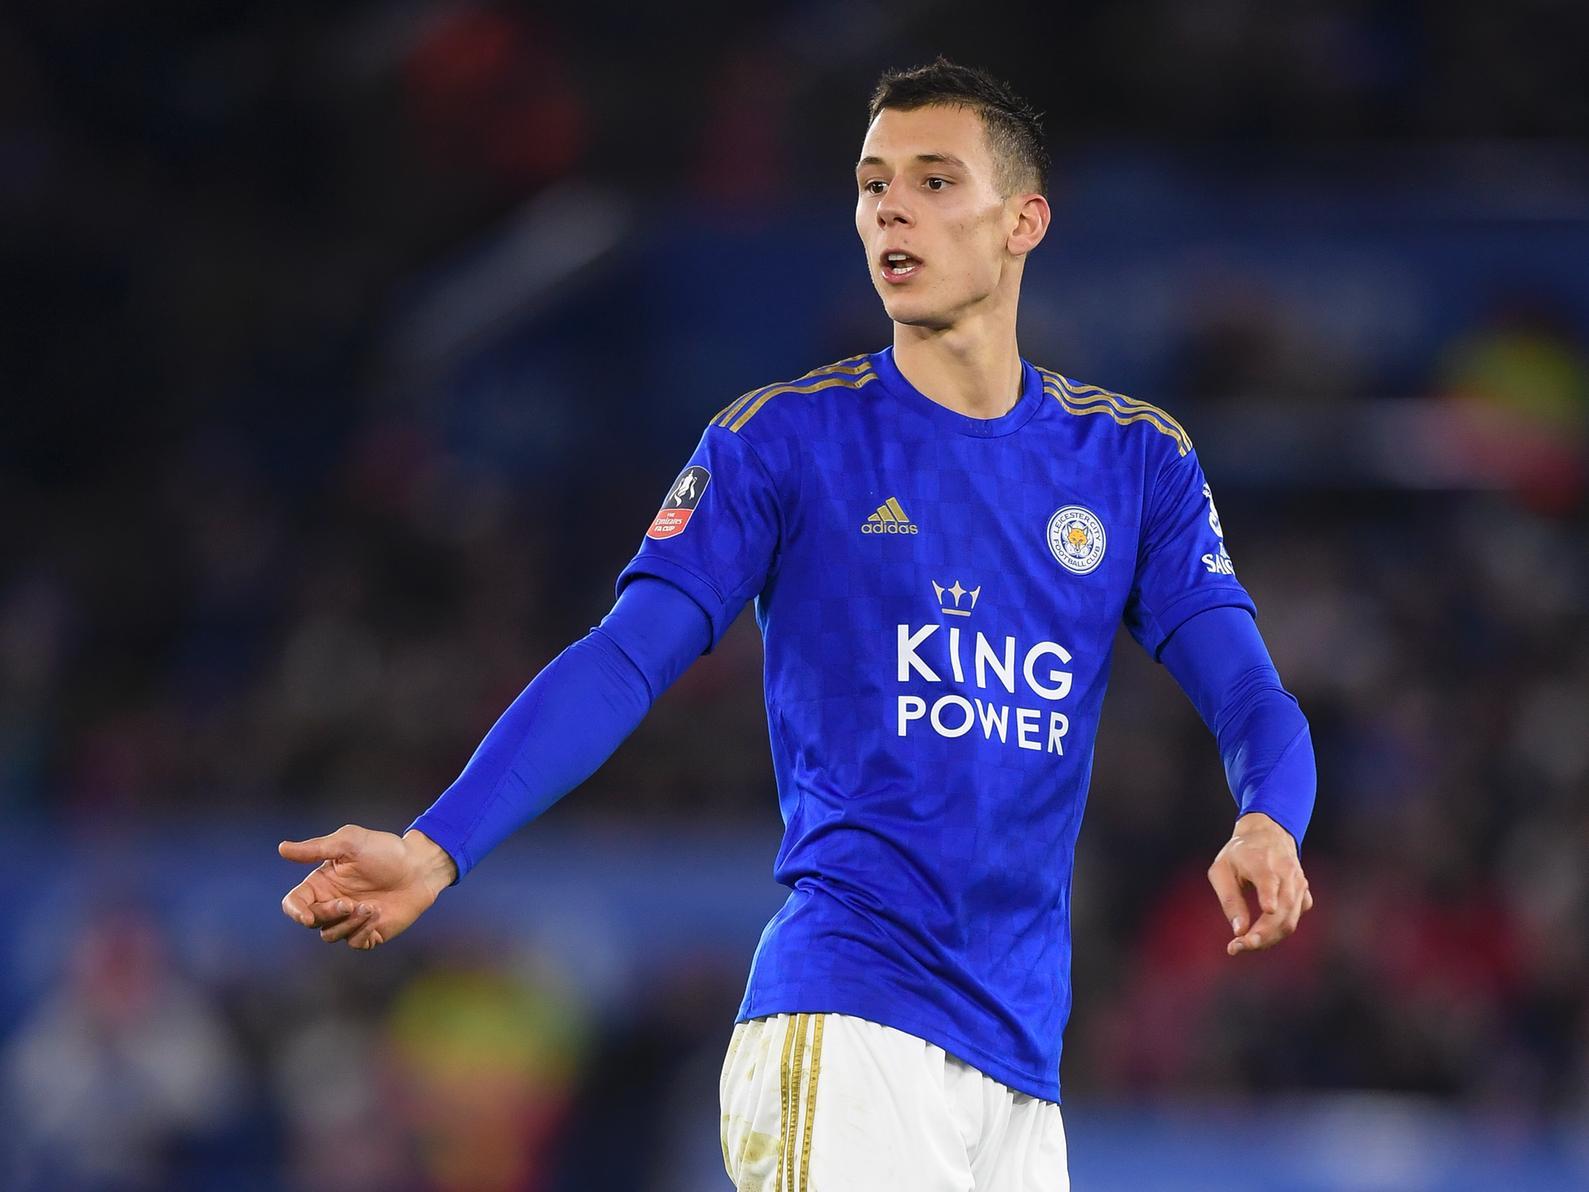 Derby County are rumoured to be eyeing up a move for Leicester City's out-of-favour defenderFilip Benkovic, whose manager has already confirmed will be allowed out on loan this month. (Sky Sports)